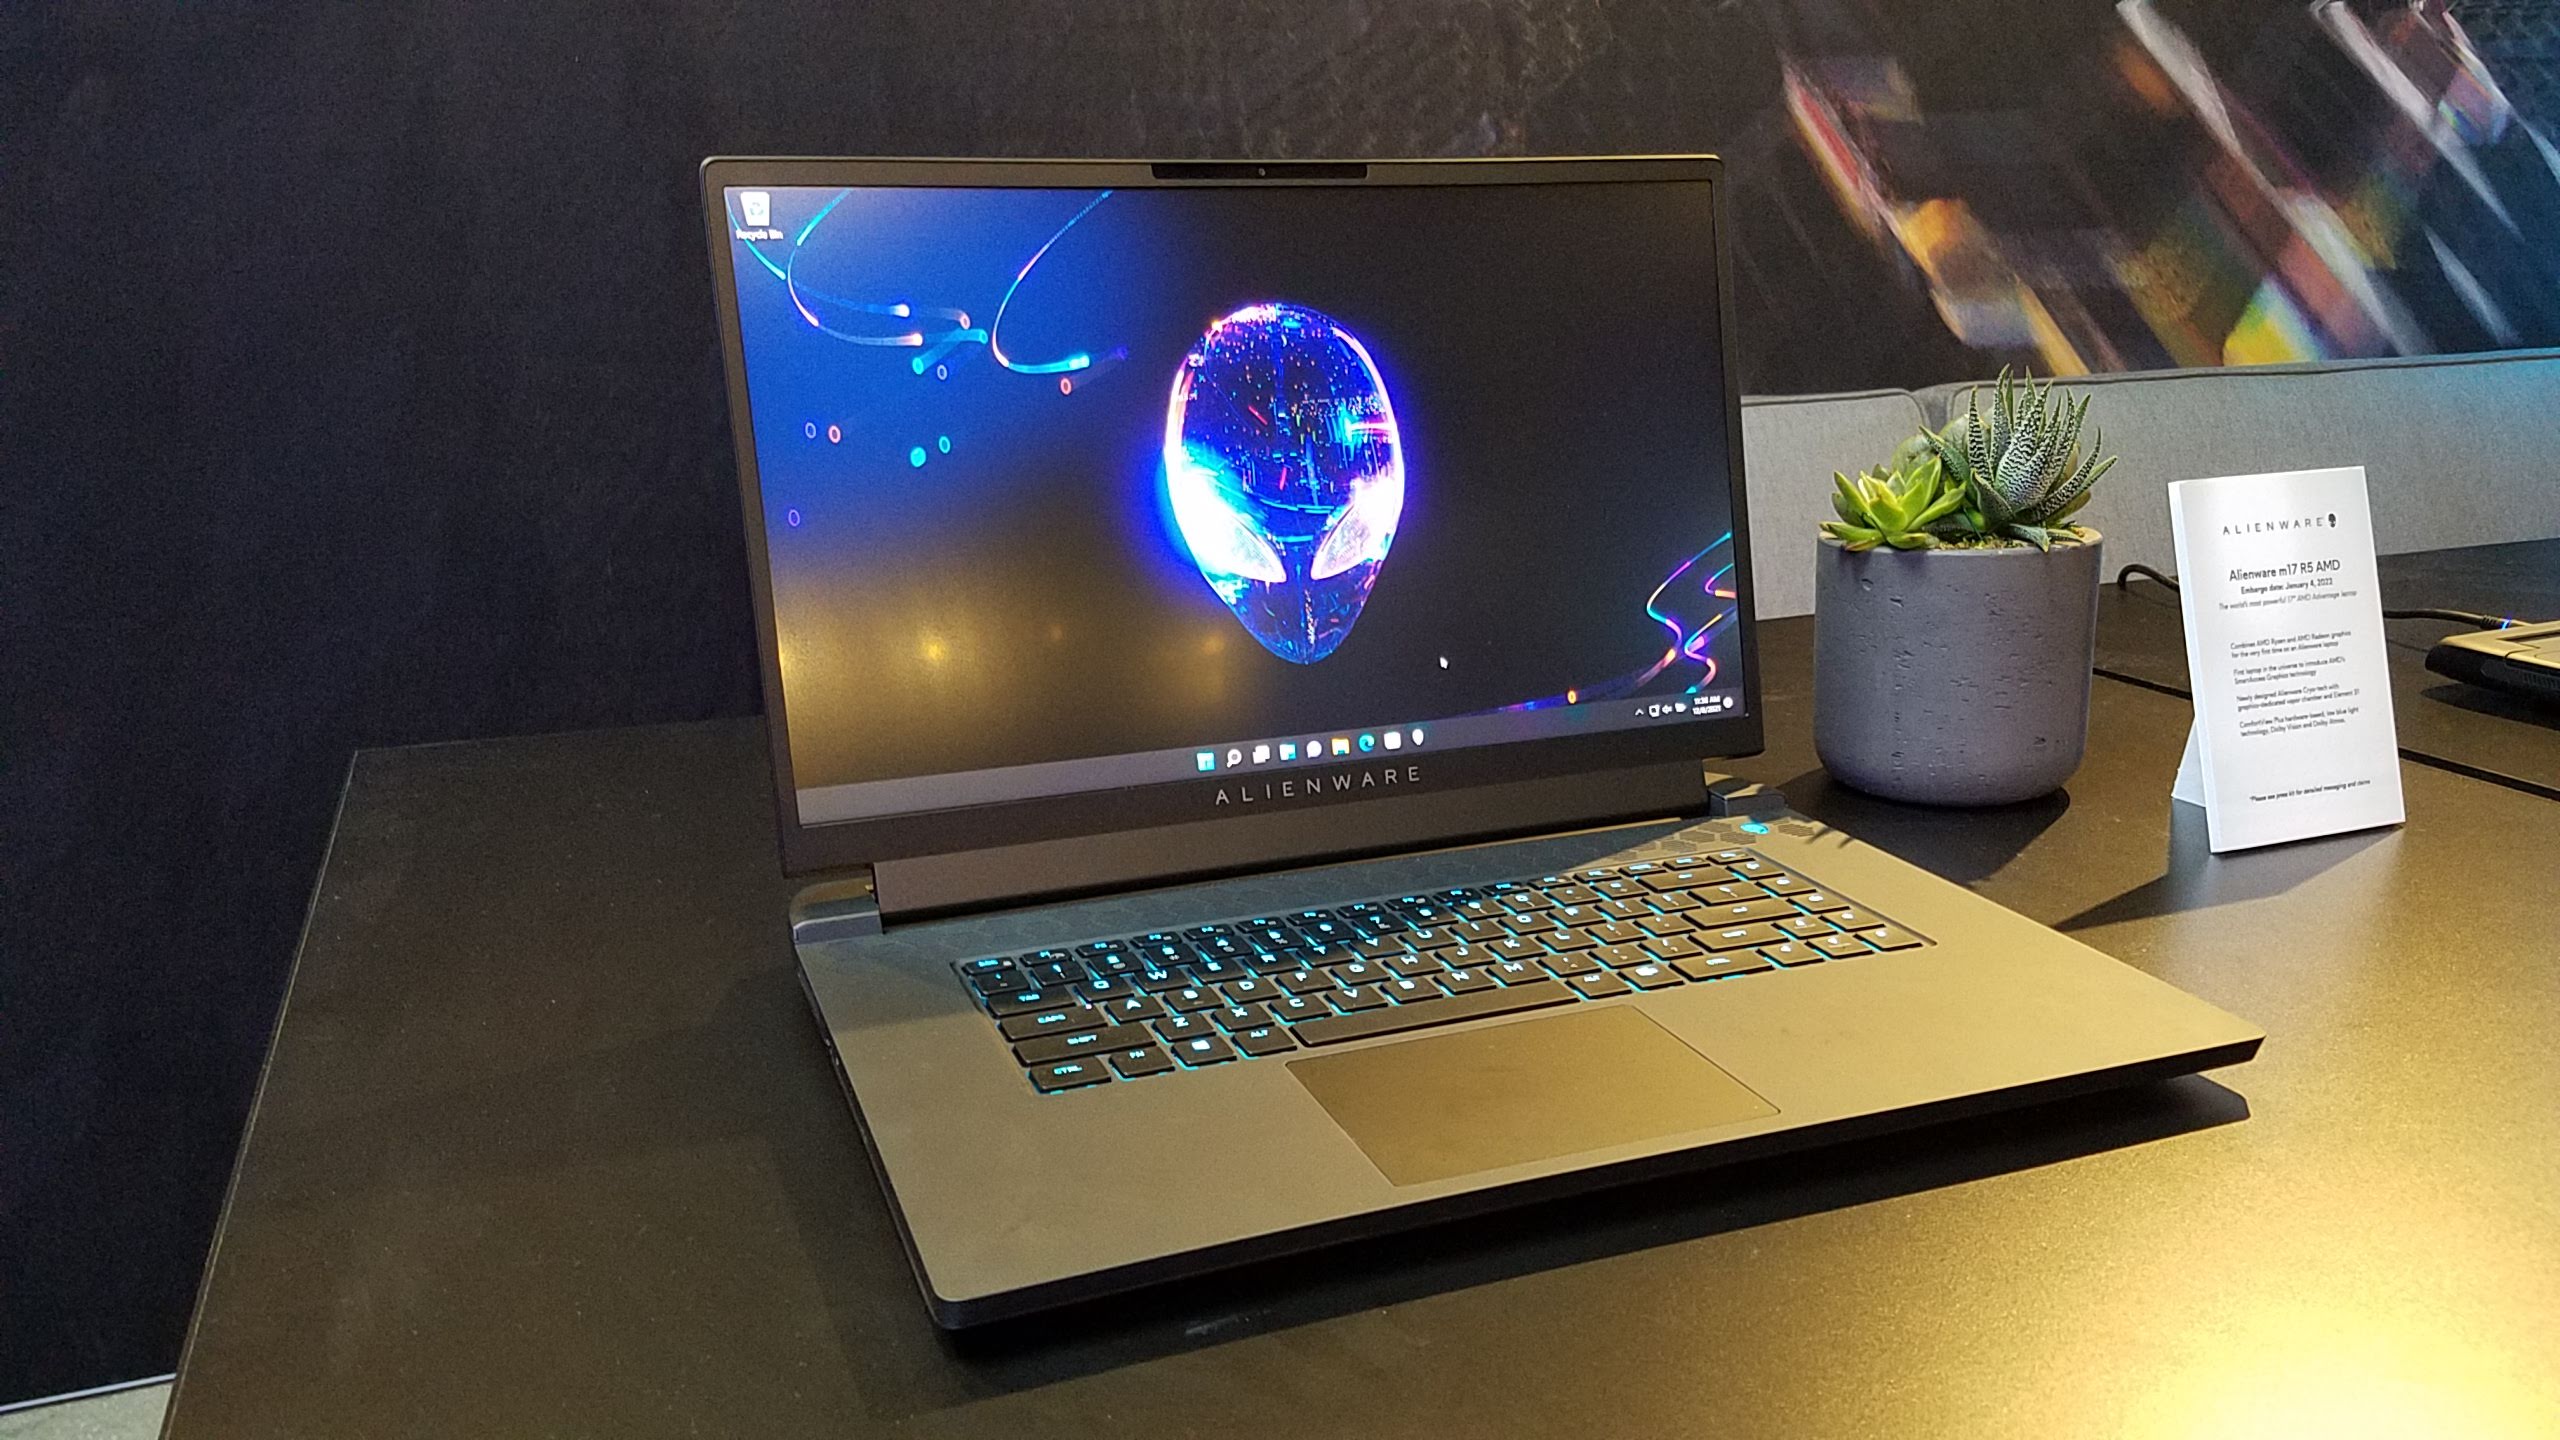 Alienware m17 R5 Ryzen Edition hands-on: One of the most powerful laptops of 2022 | Tom's Guide